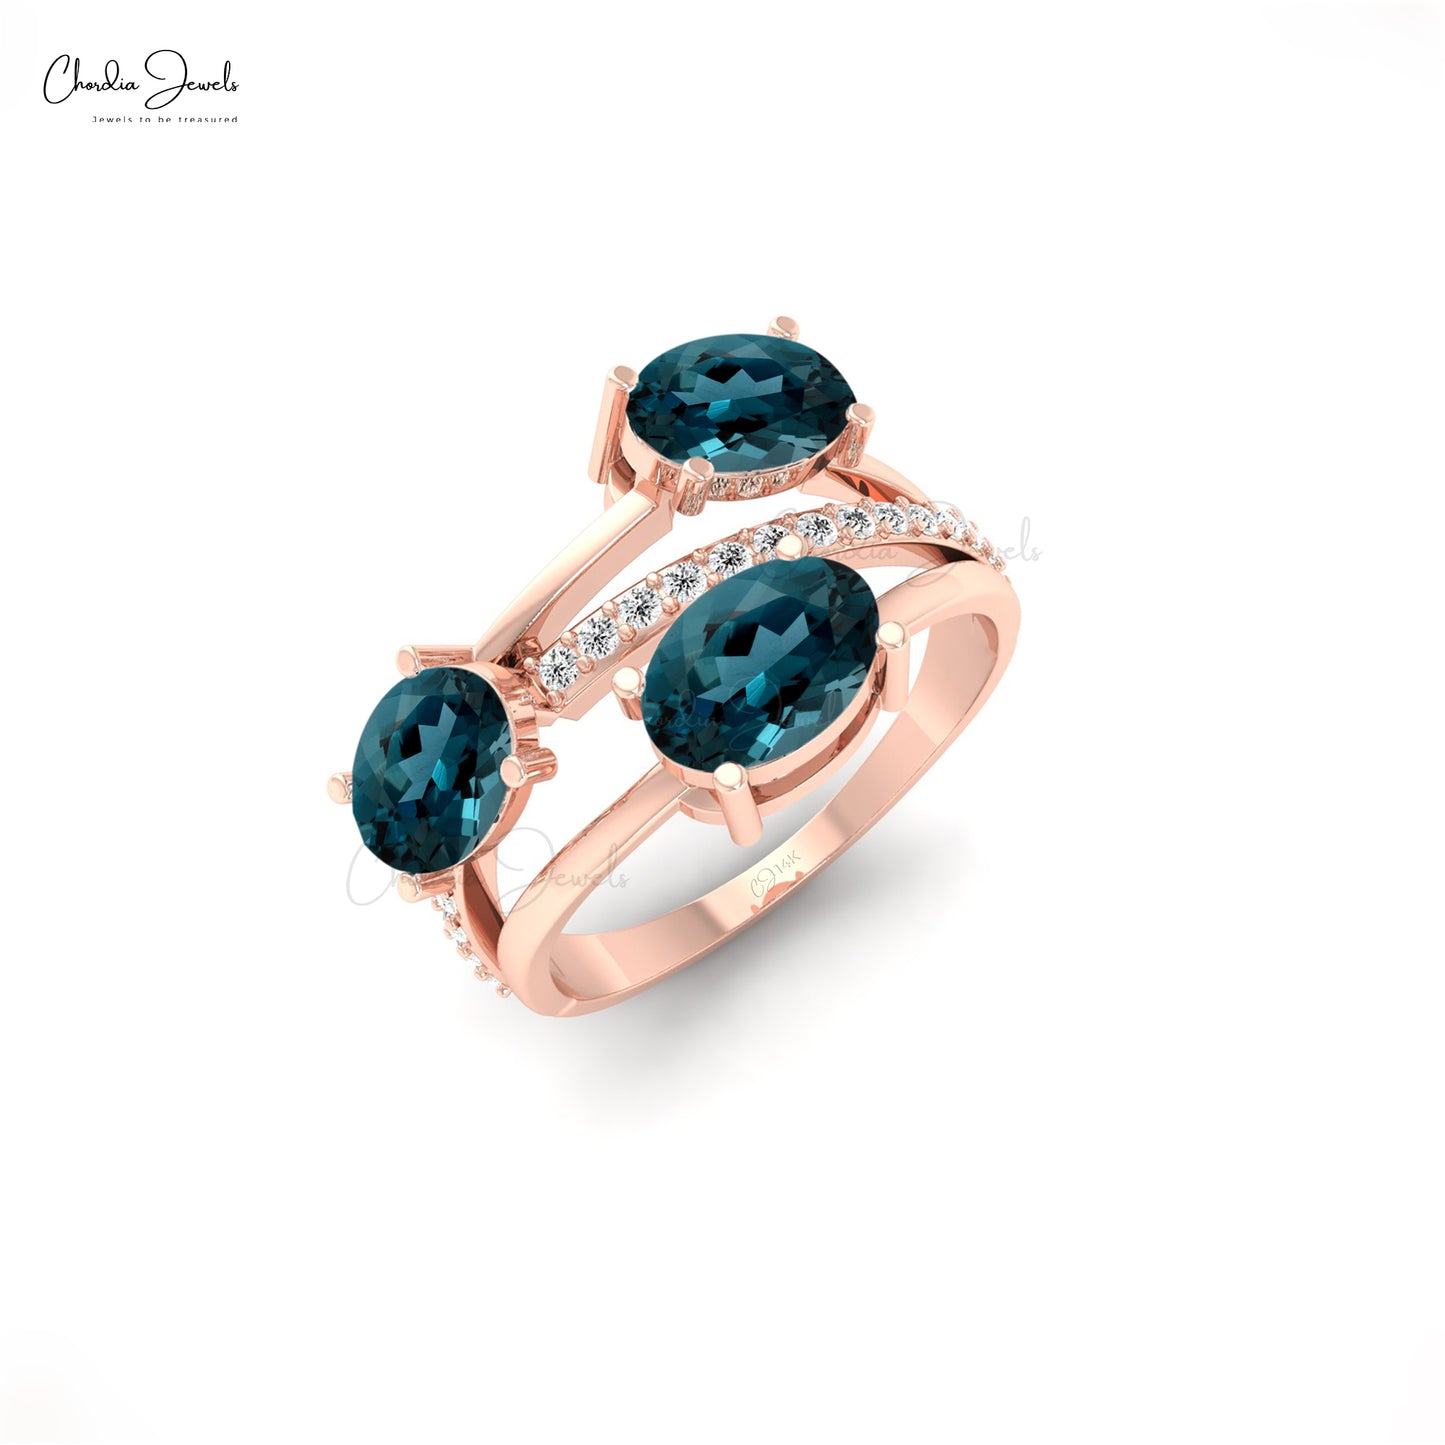 Crossover 3-Stone London Blue Topaz Ring in 14k Solid Gold Genuine 0.16ct Diamond Ring